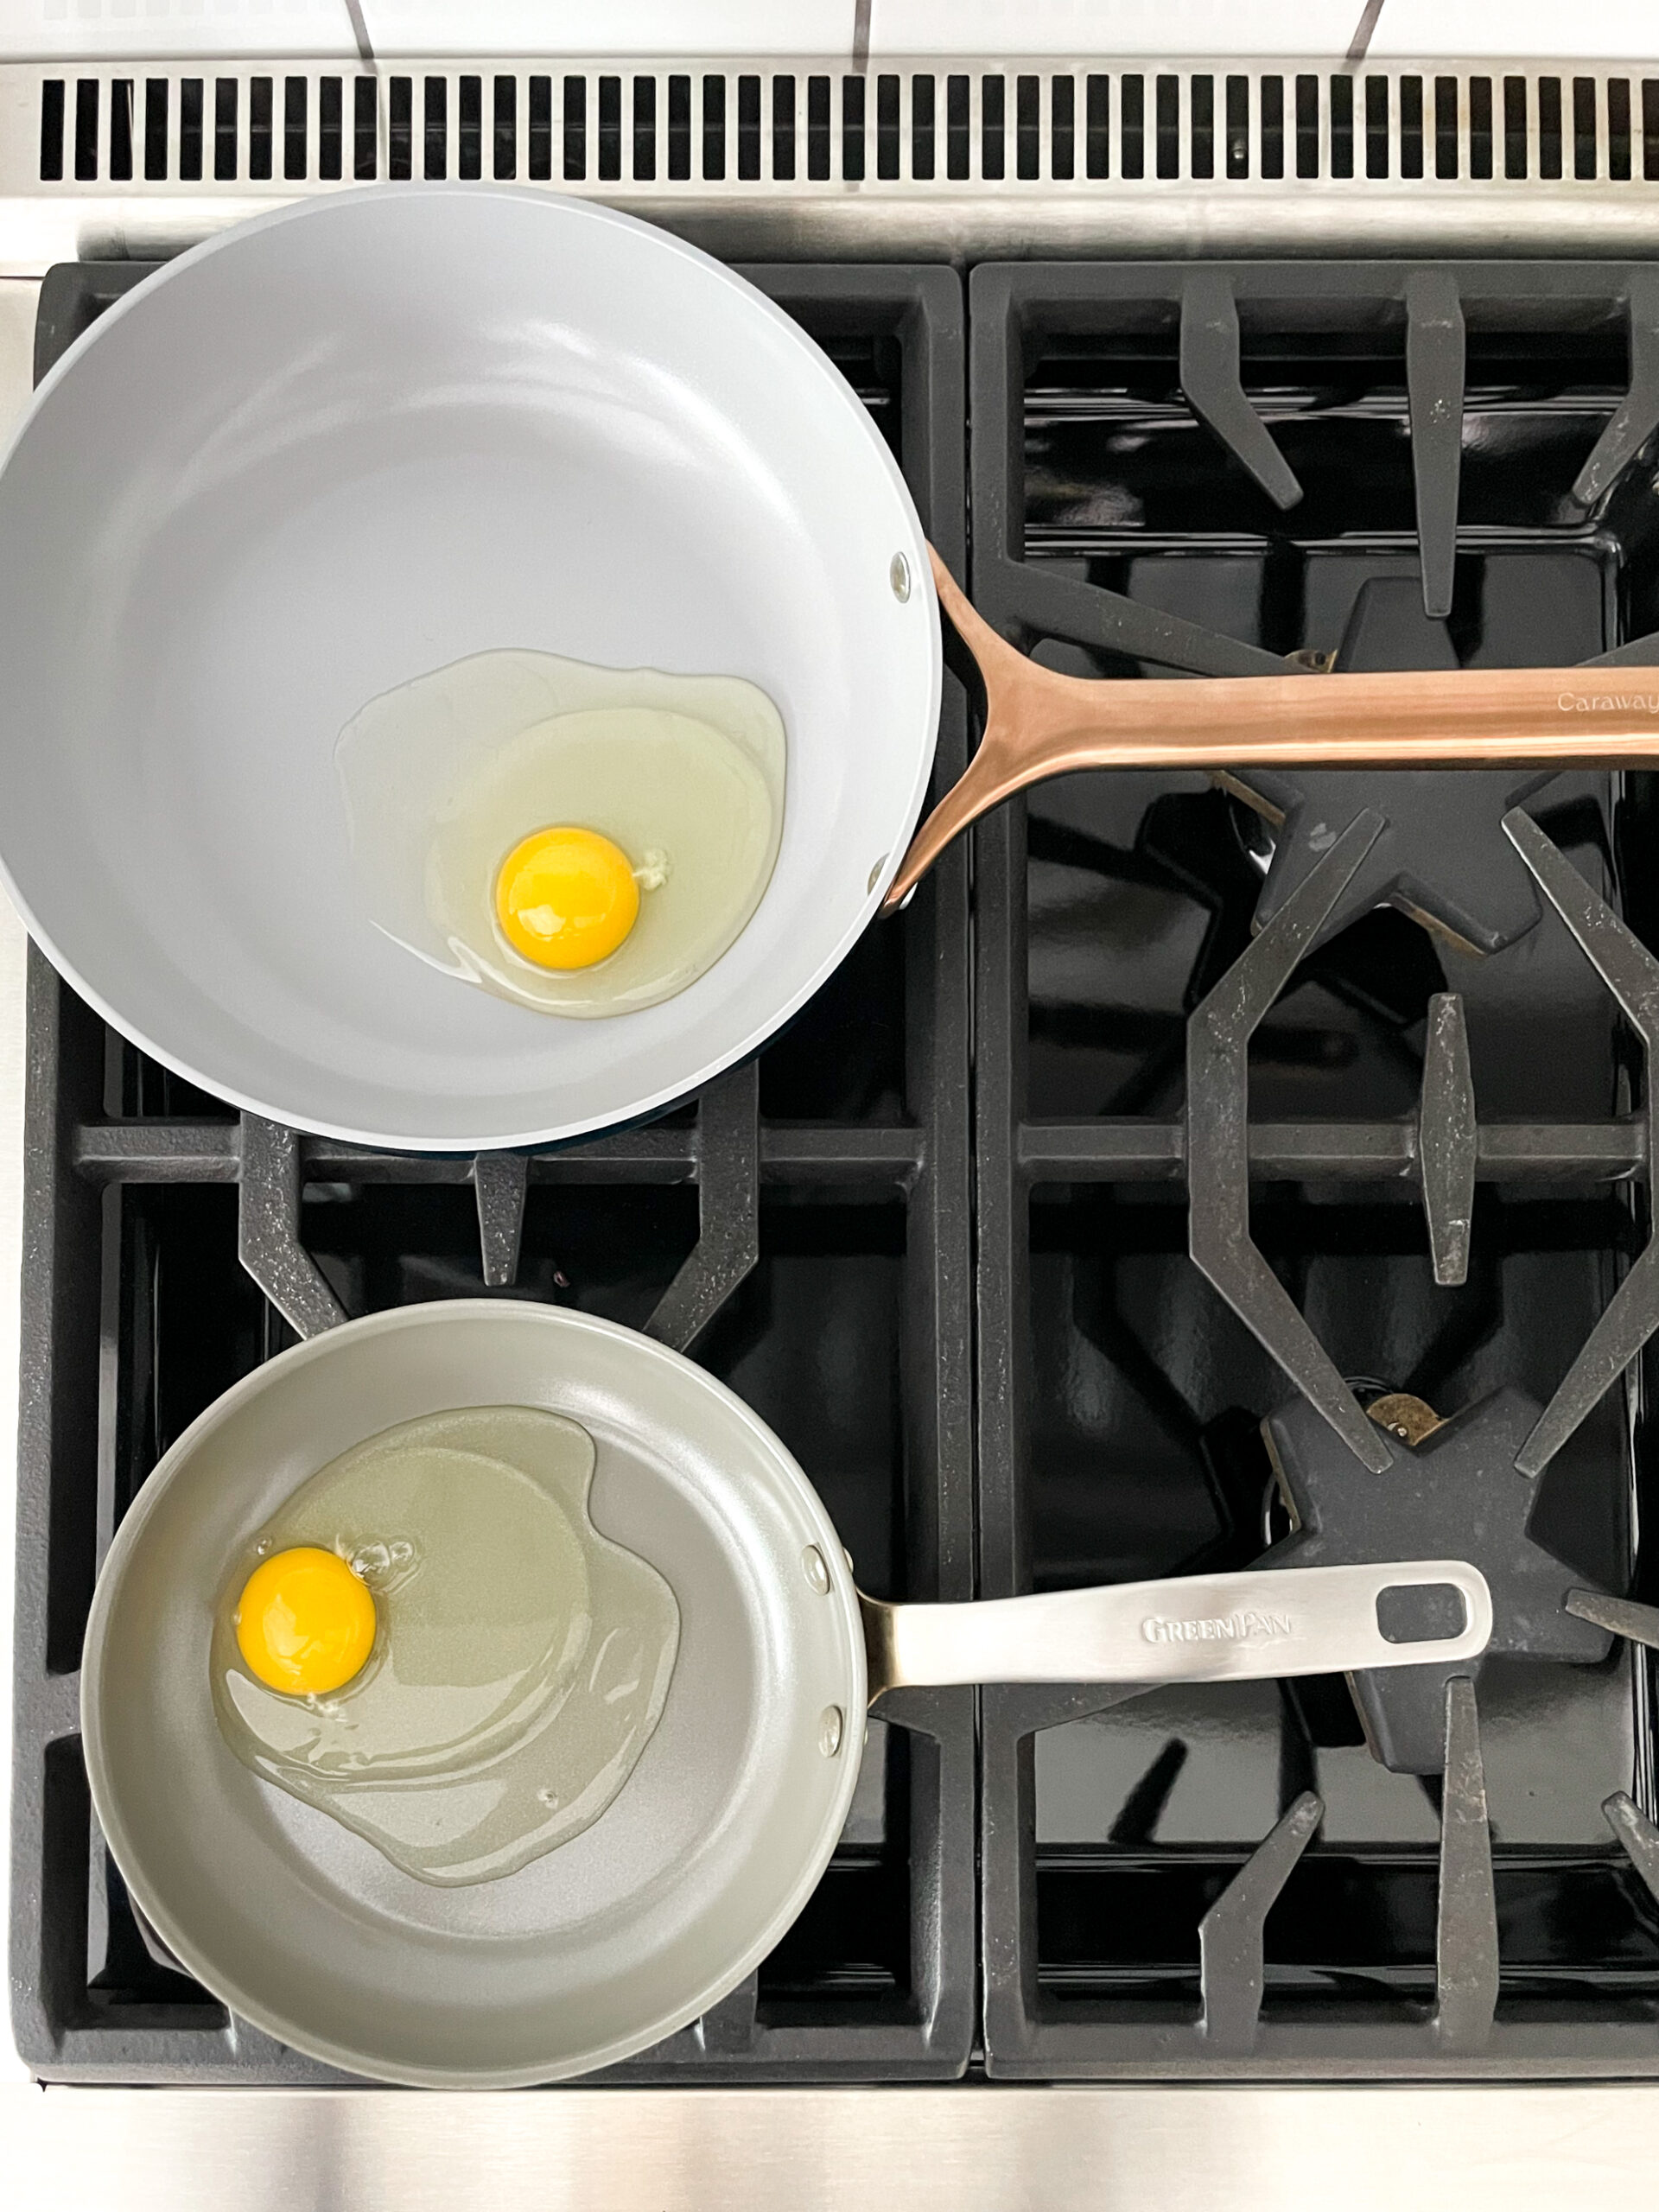 eggs cooking in both caraway and green pan